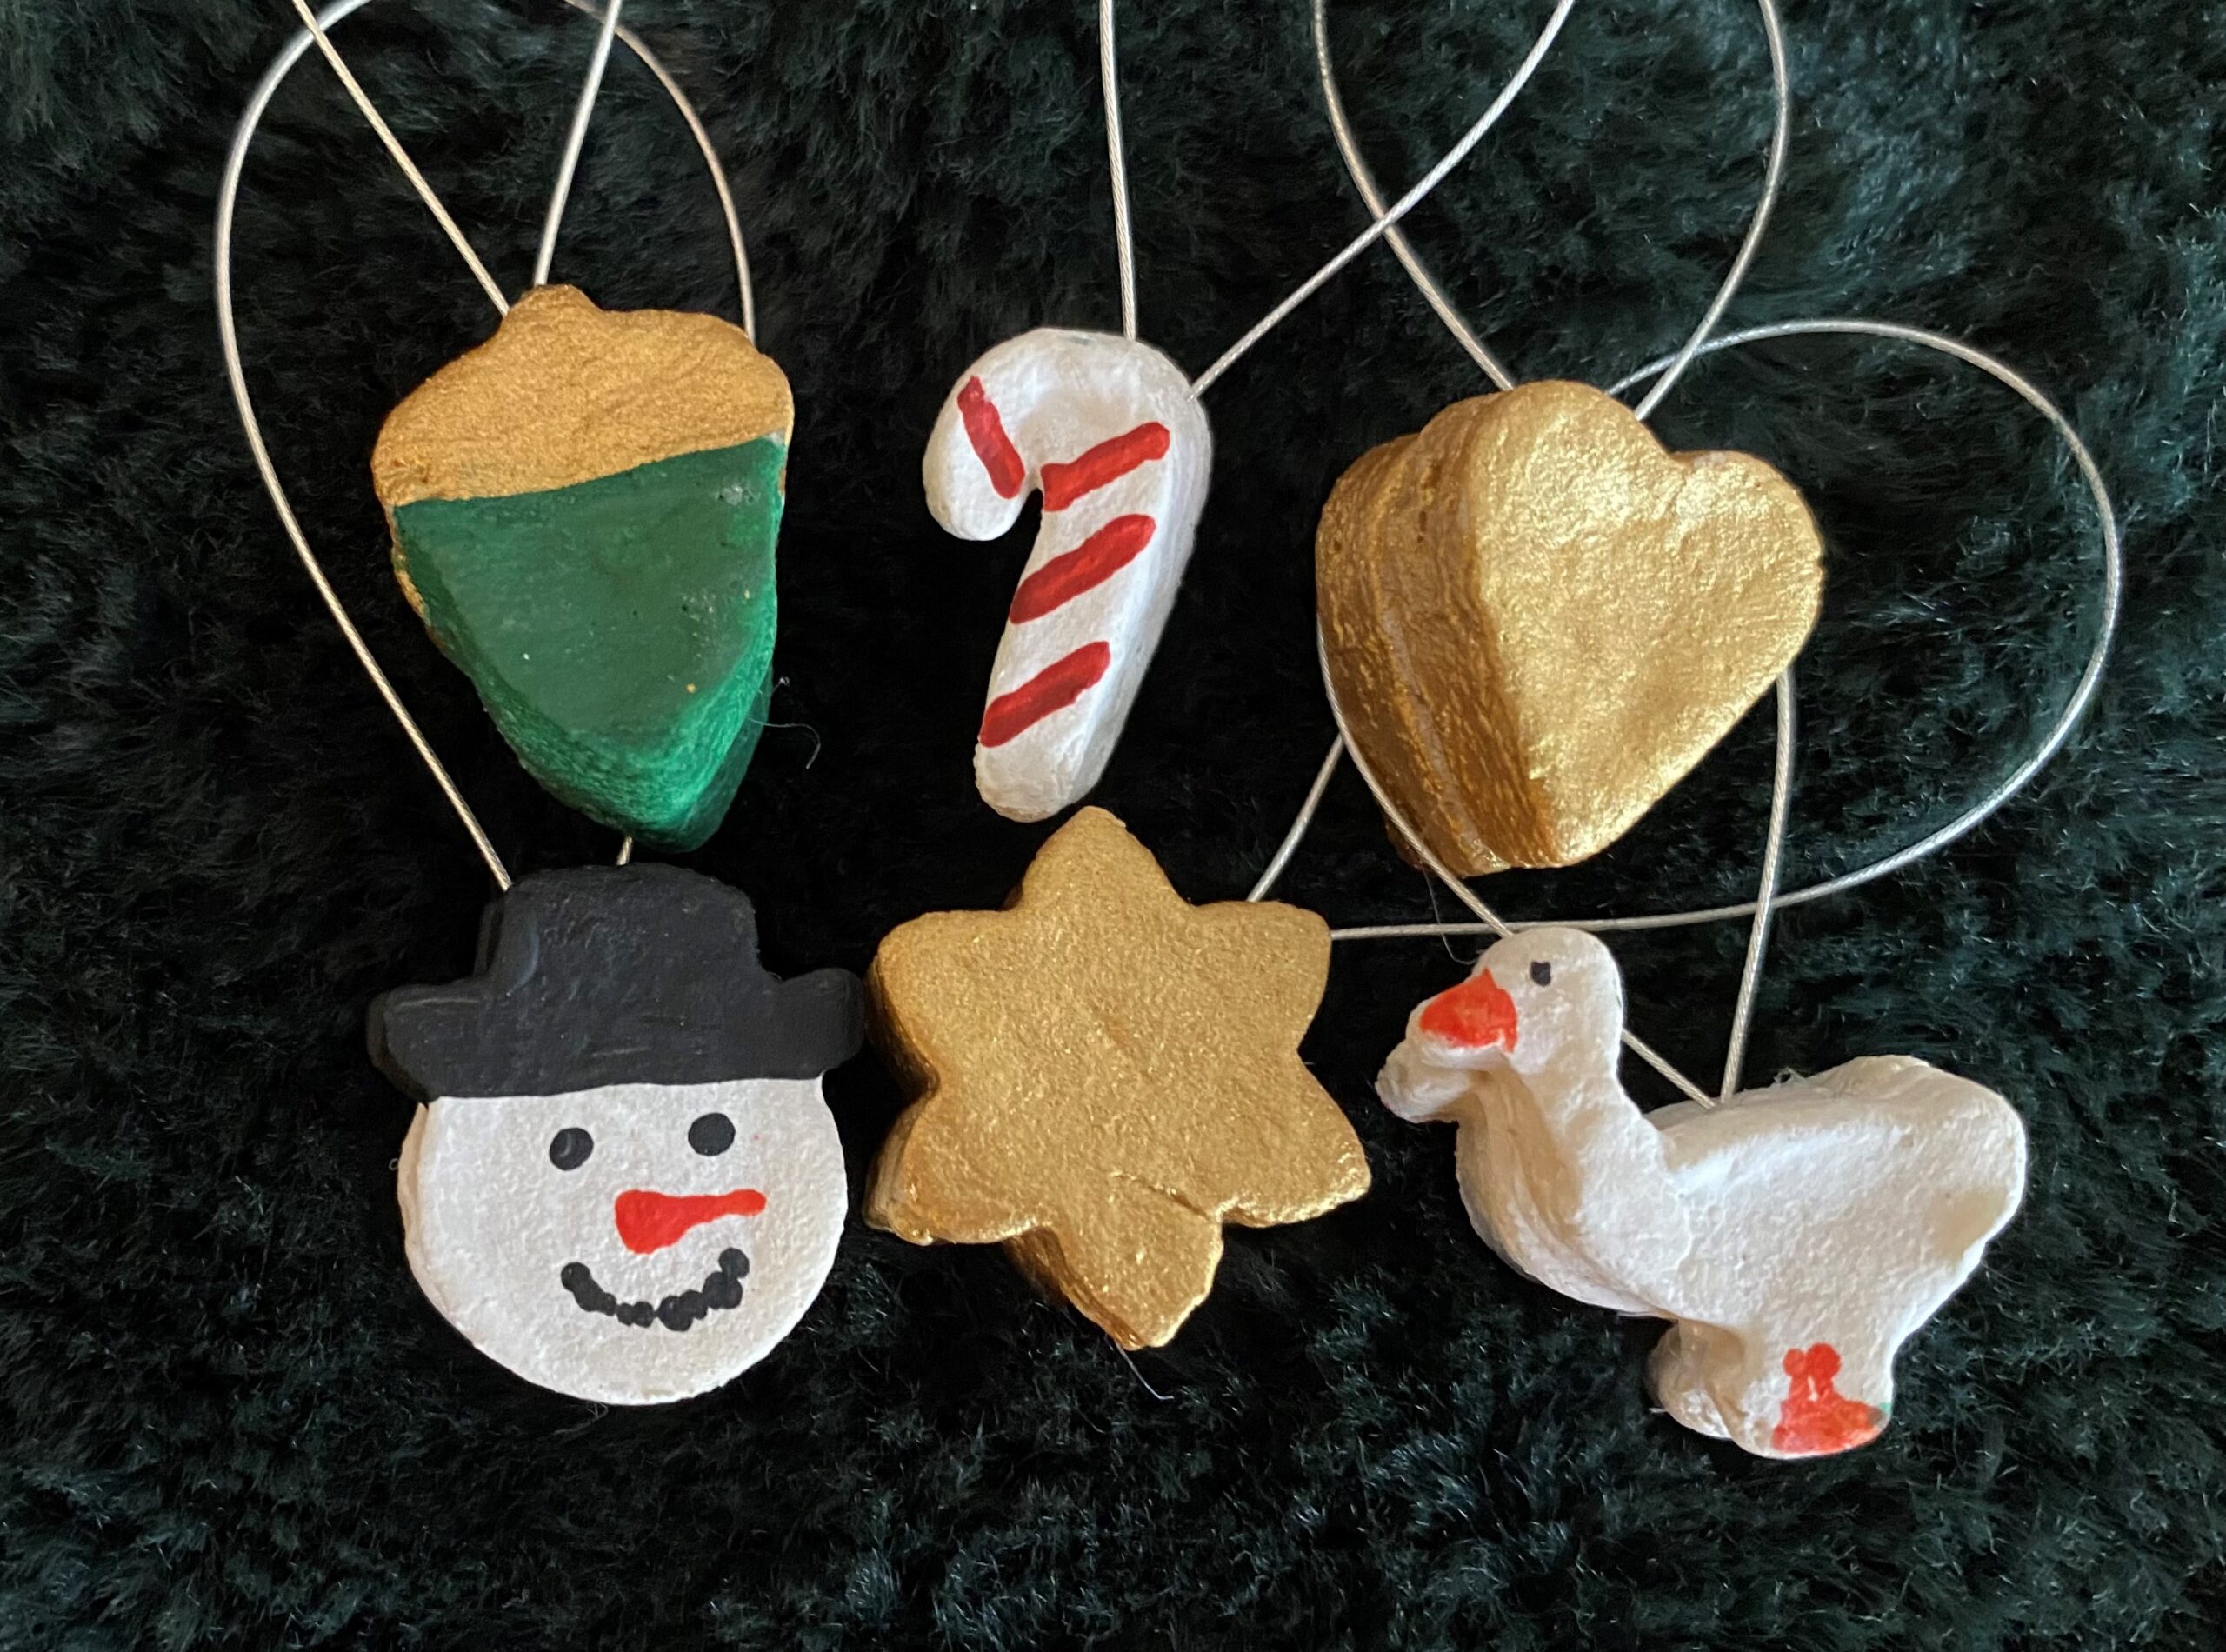 Making your own salt dough decorations at home is a fun and rewarding activity for children and adults alike.